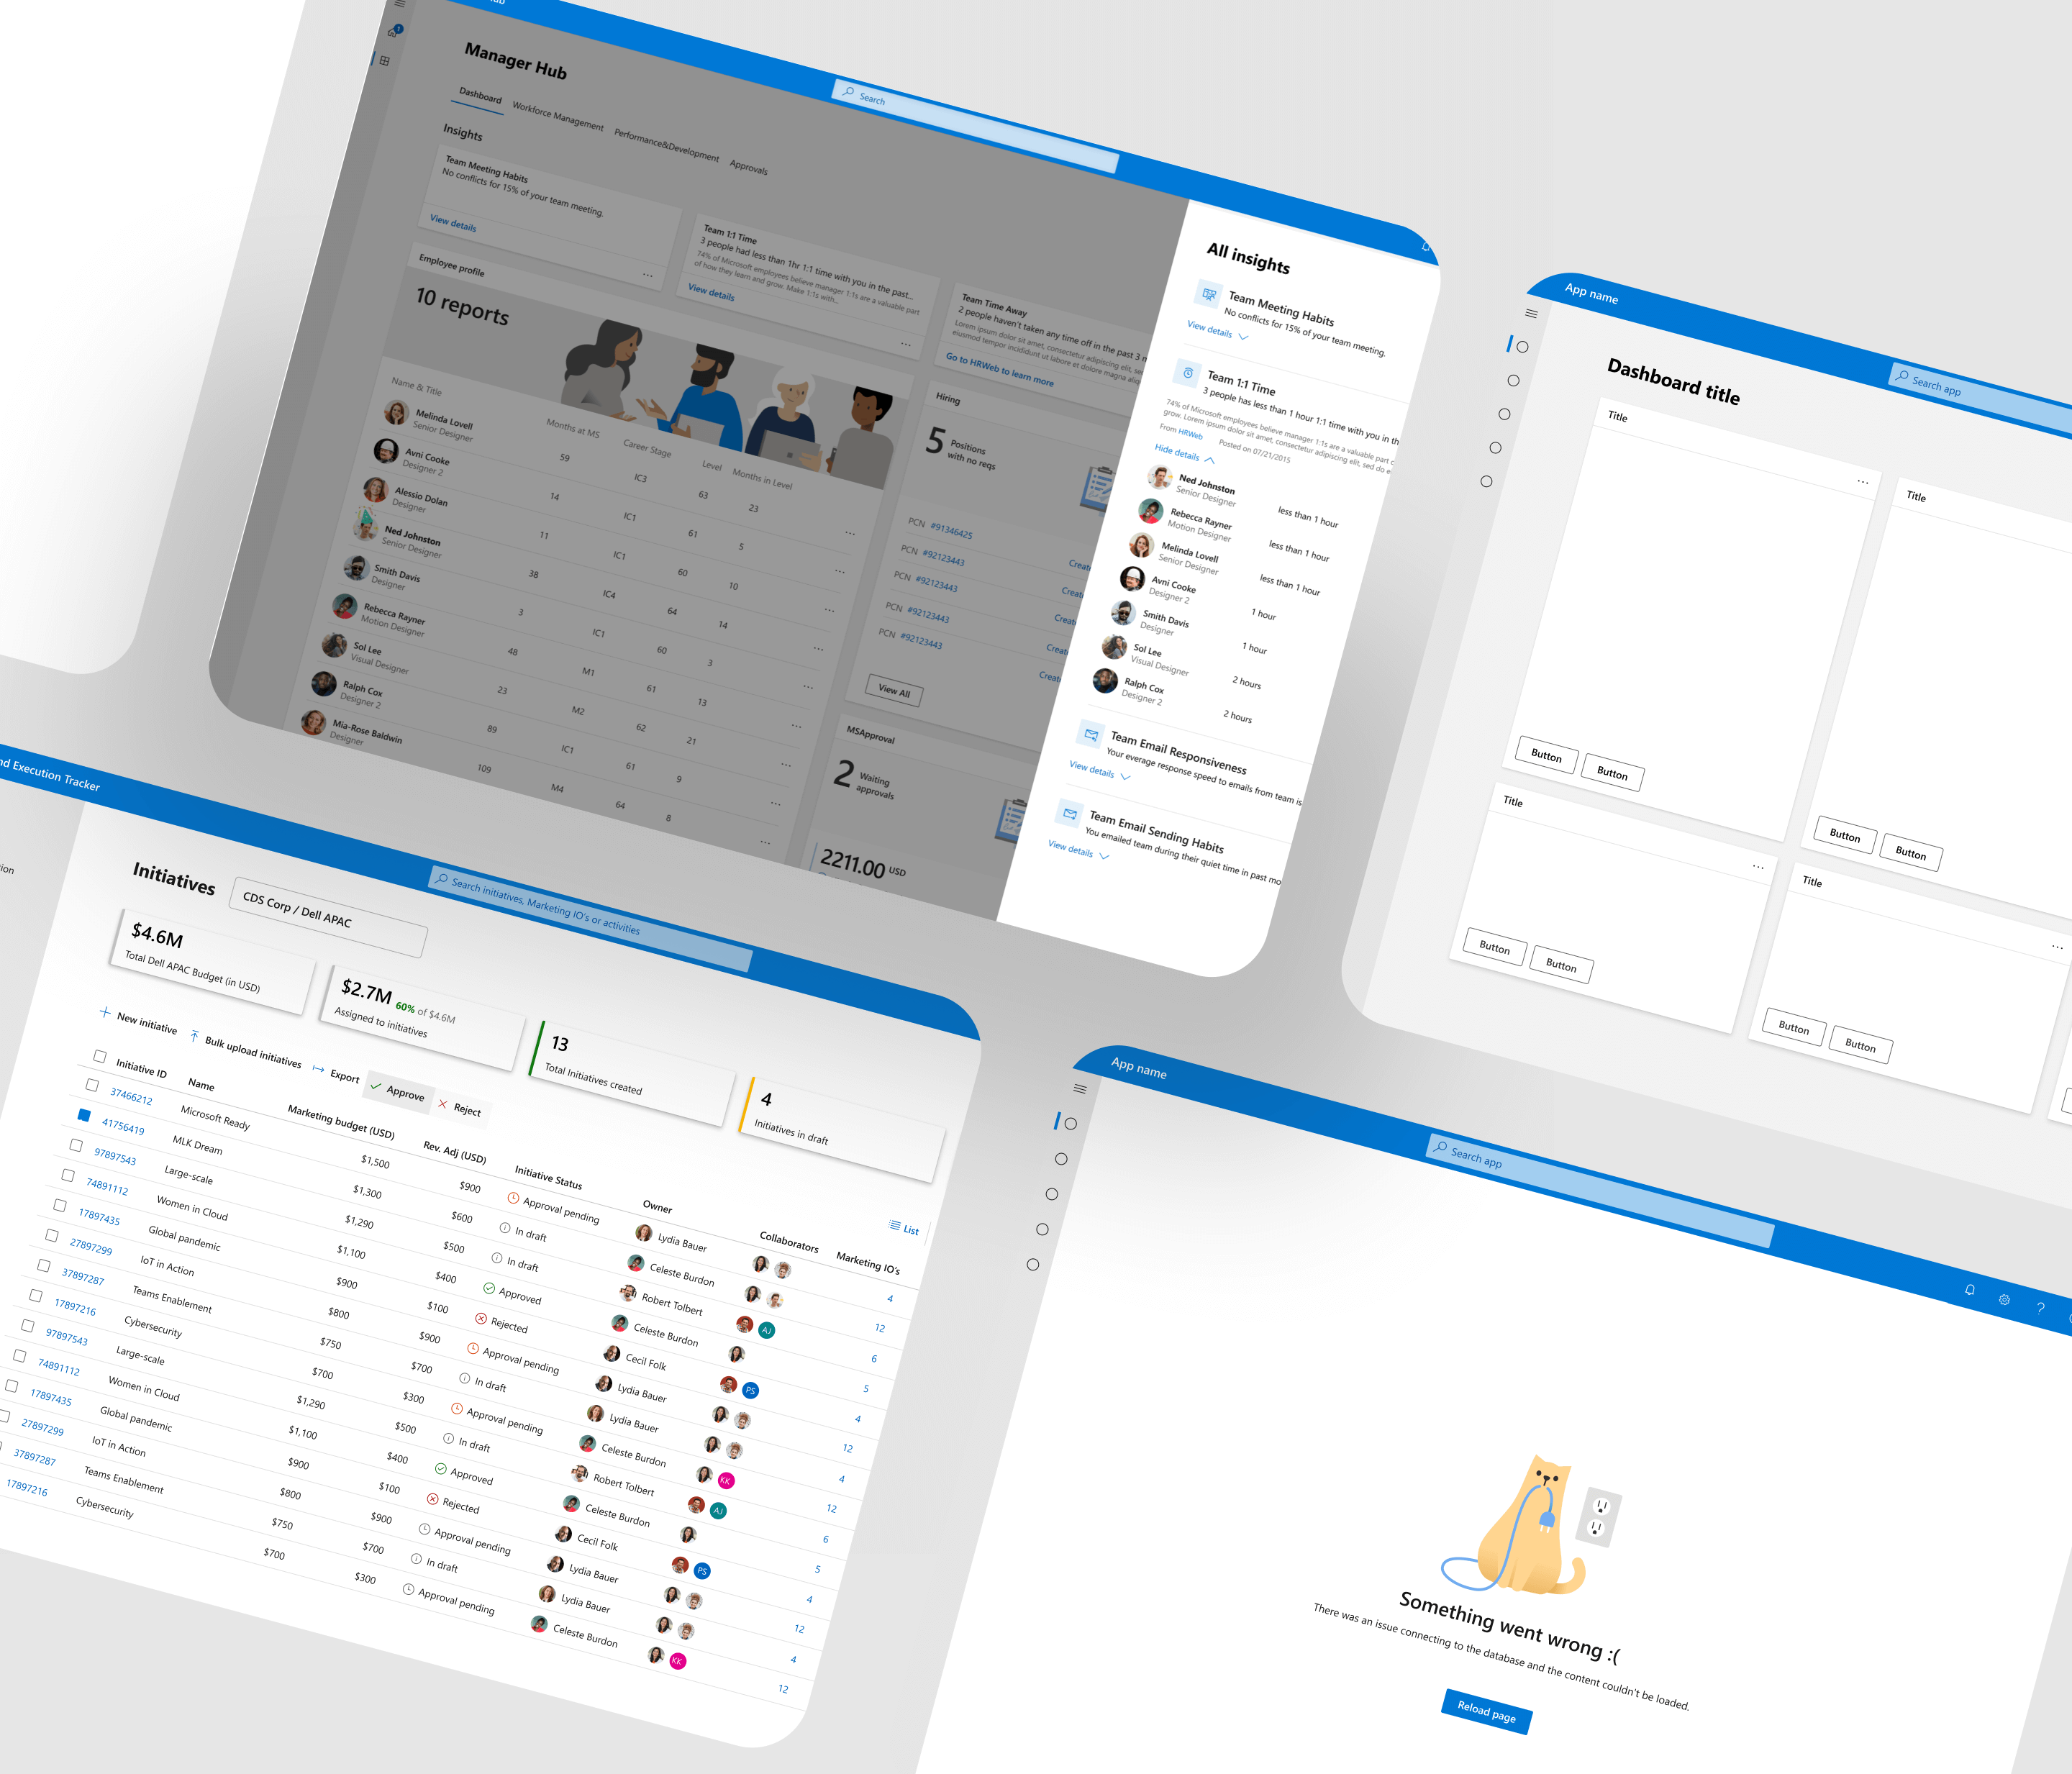 Showcase of the design system used in various products